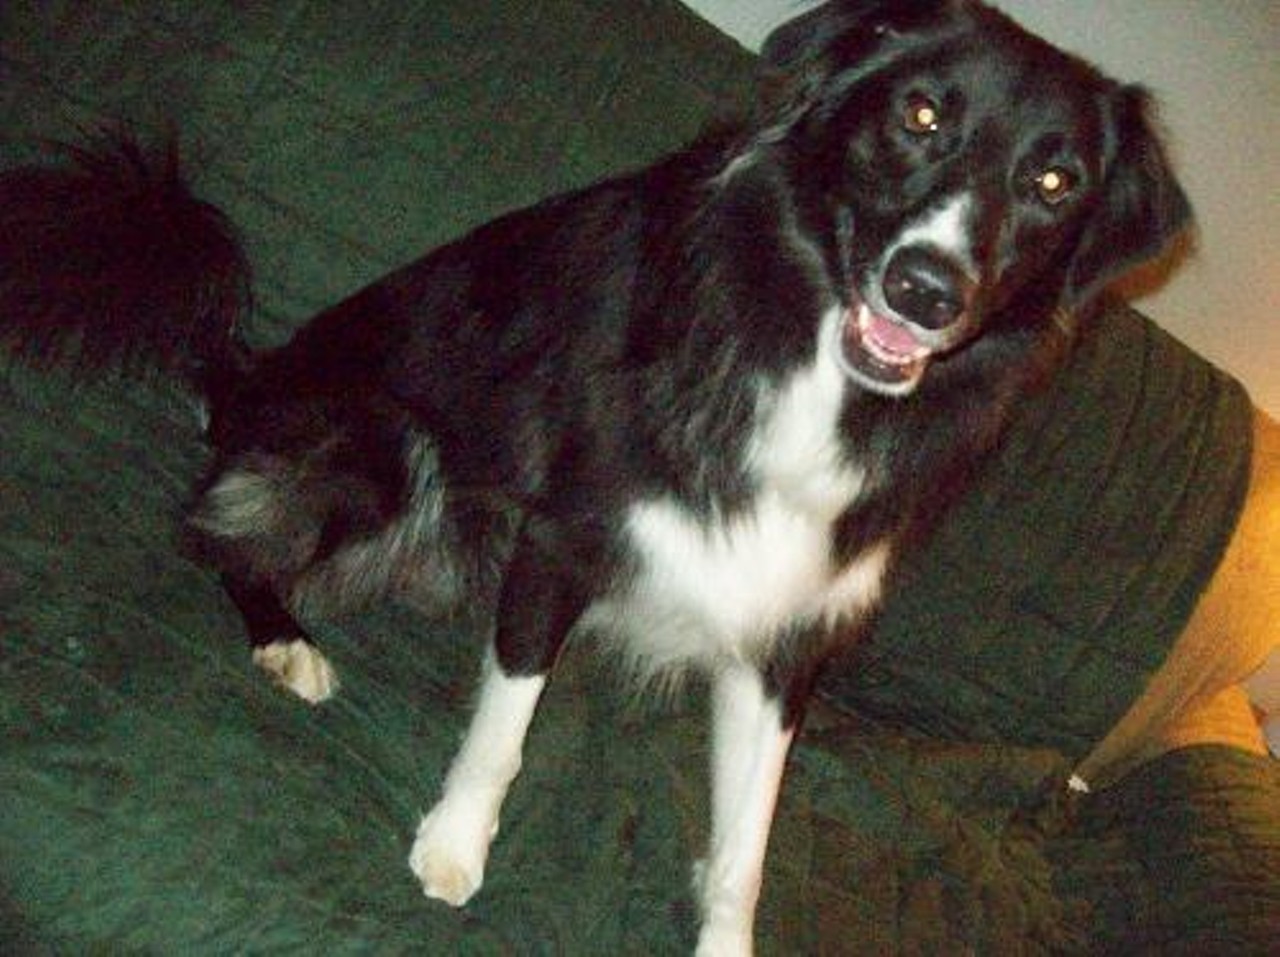 Baron is a six-year-old Border Collie mix who's house and crate trained and extremely intelligent, but requires a firm hand and exercise.